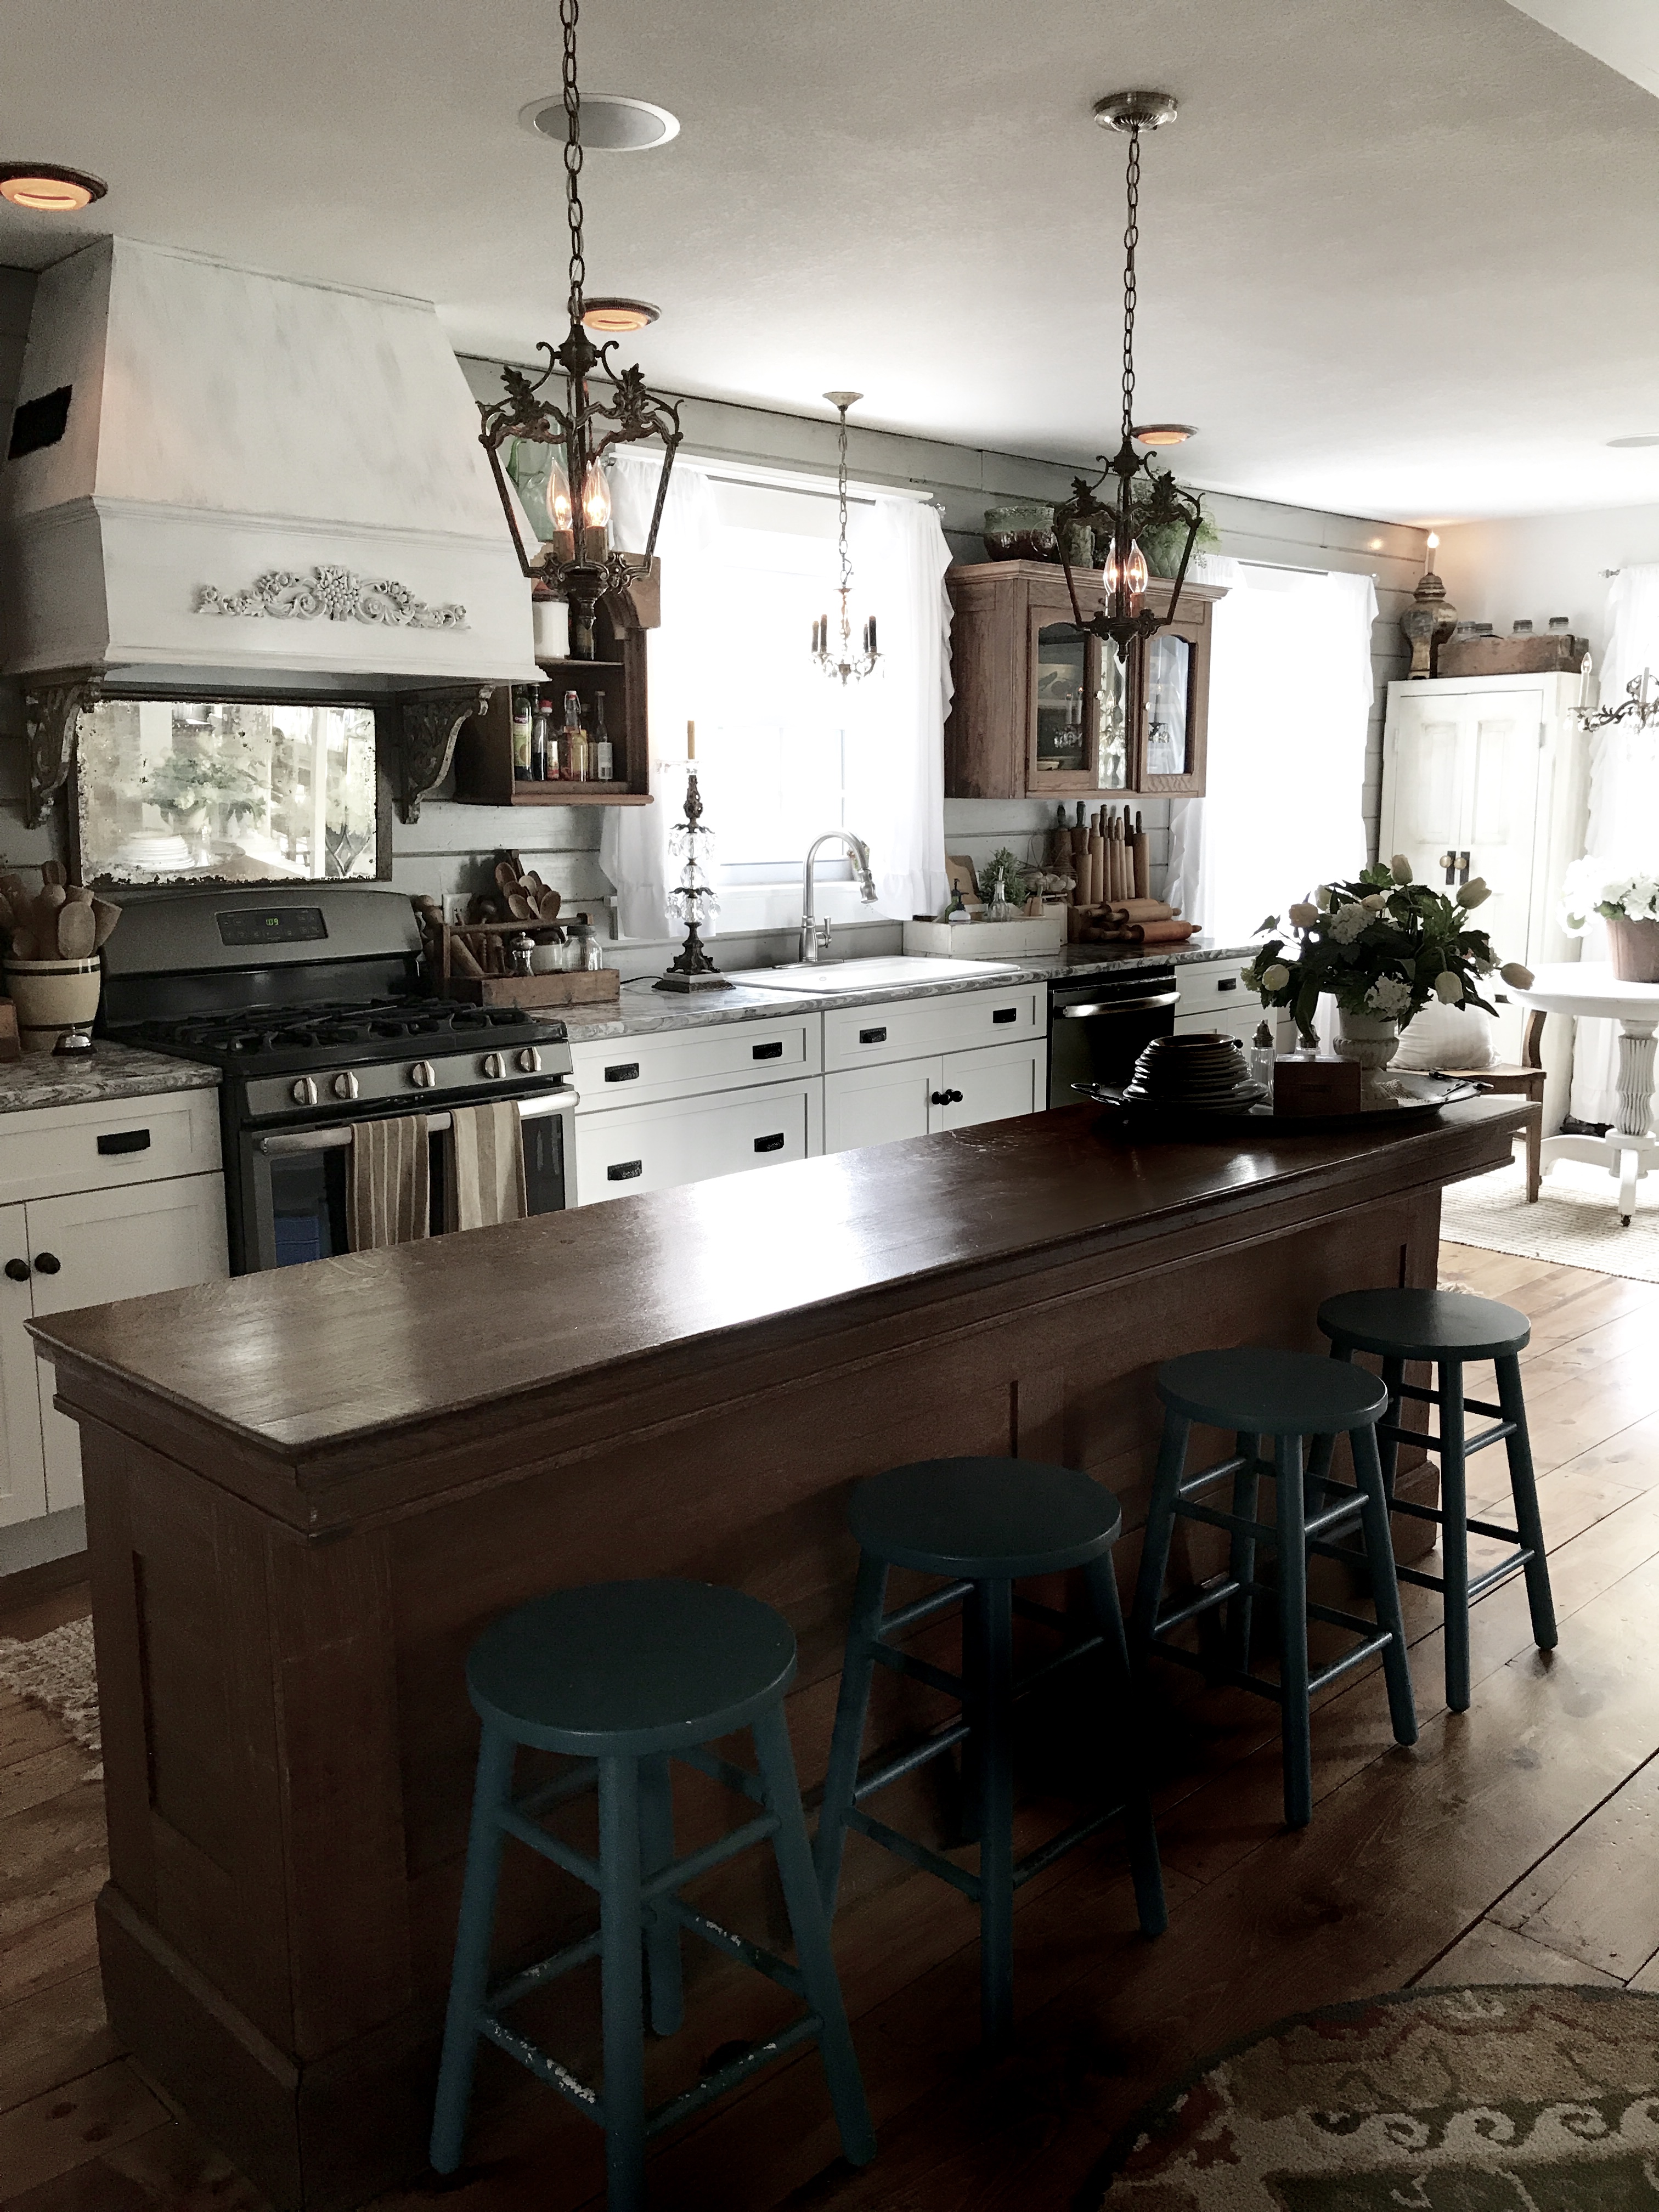 Antique store counter as kitchen island - House on Winchester